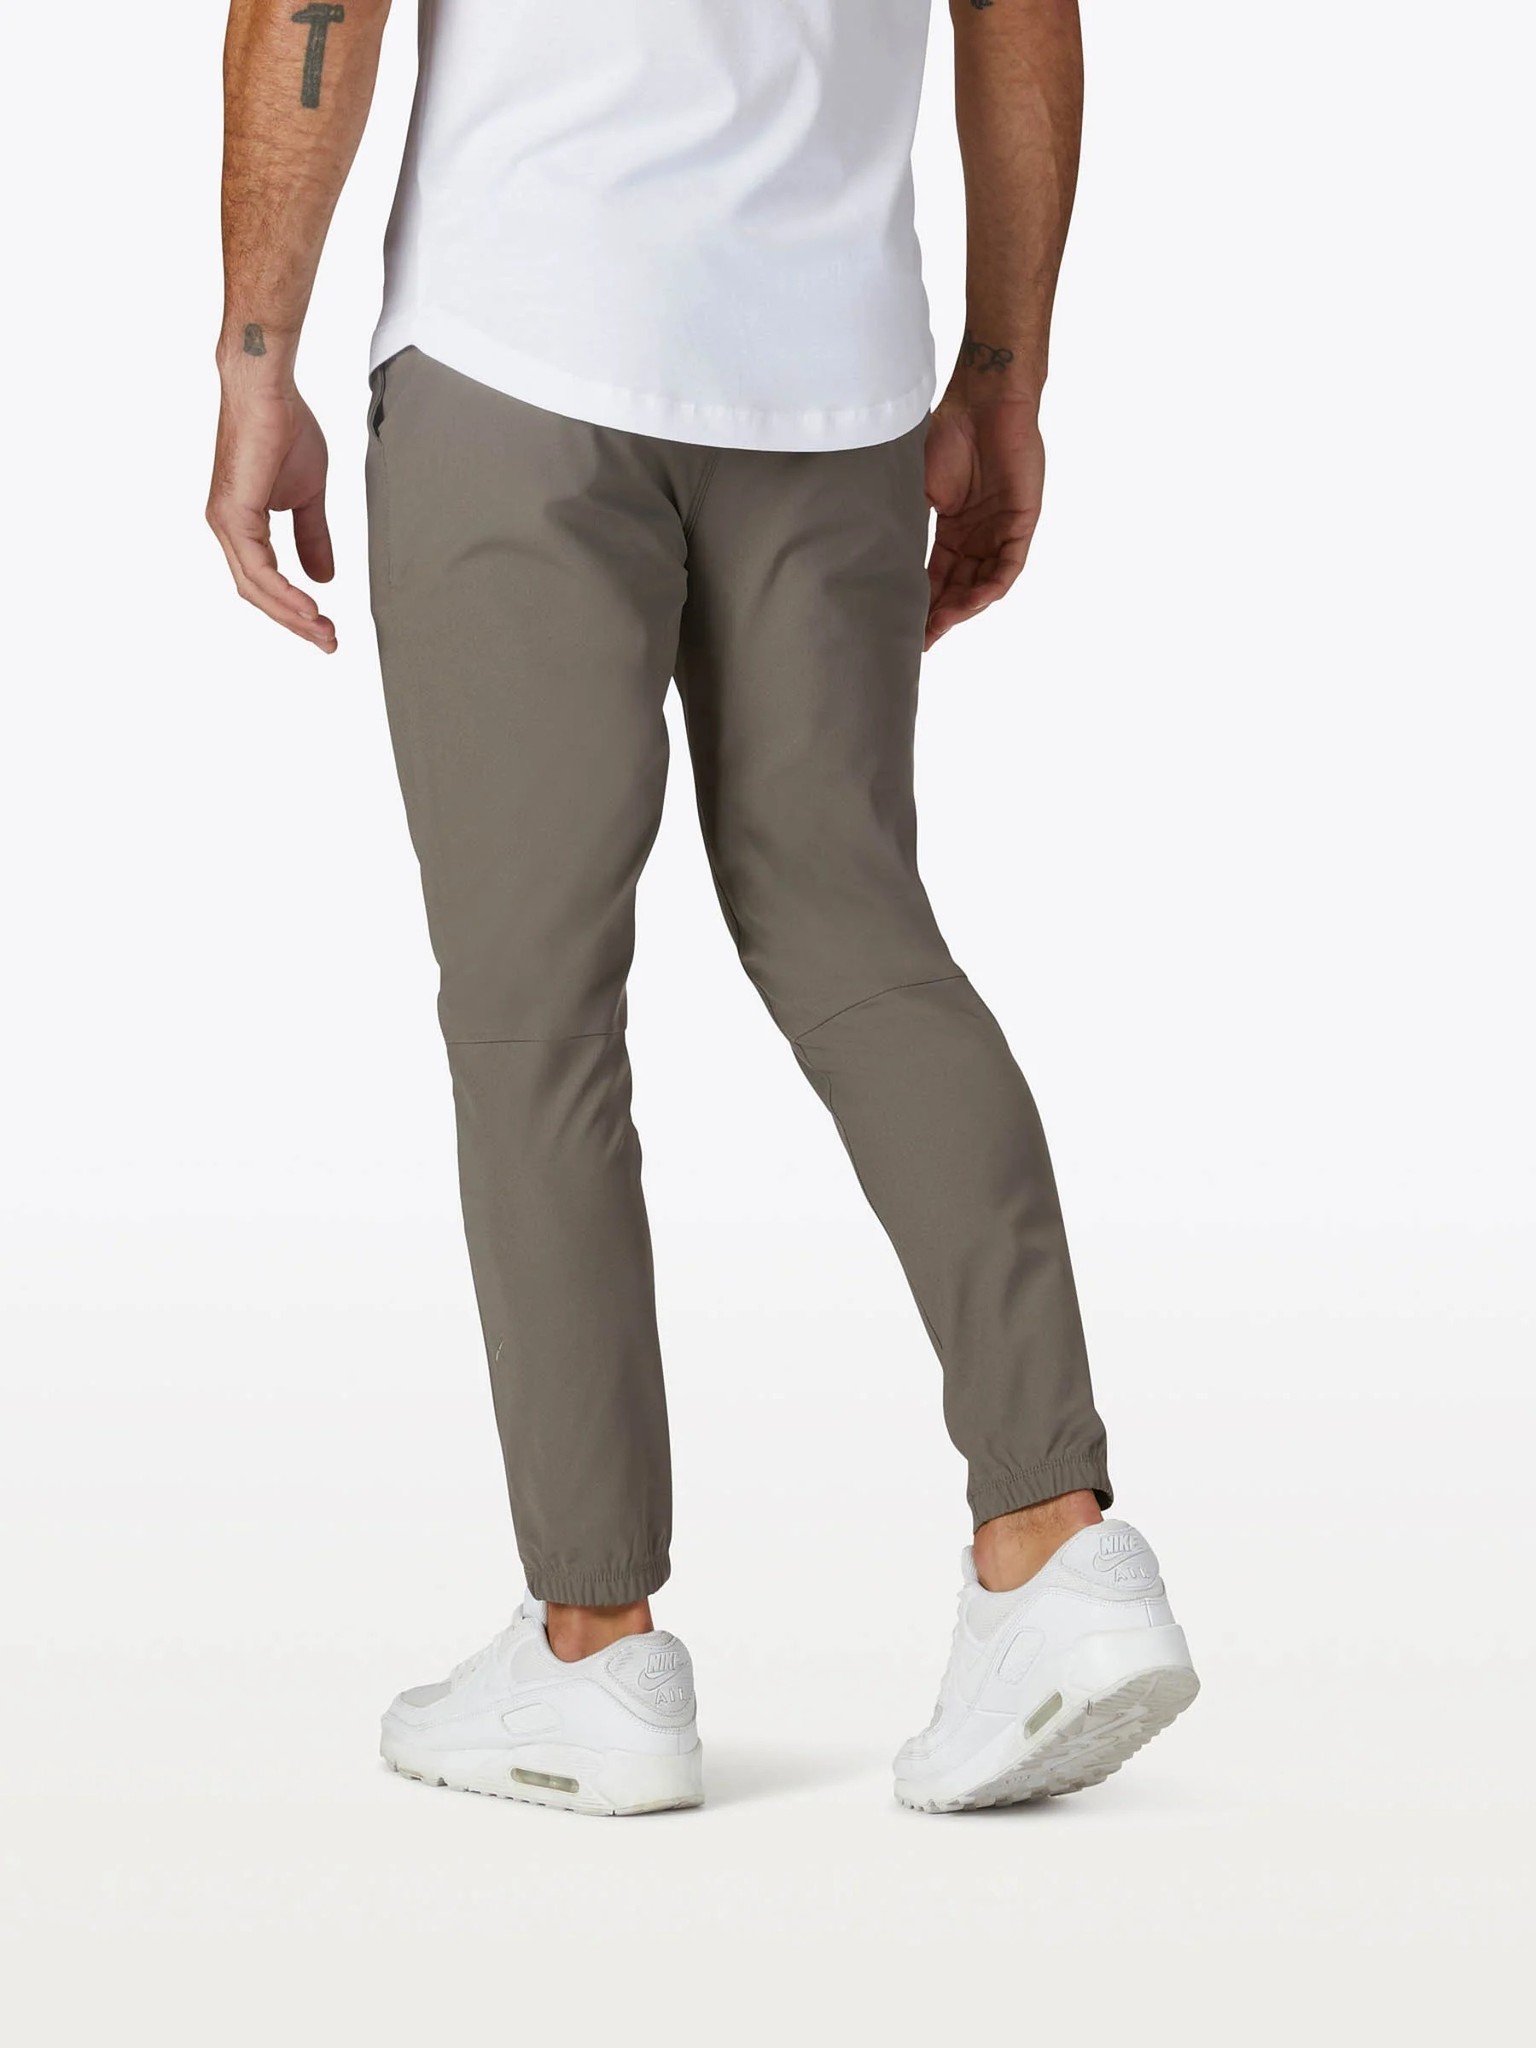 G-Force Joggers – Apex Canyon